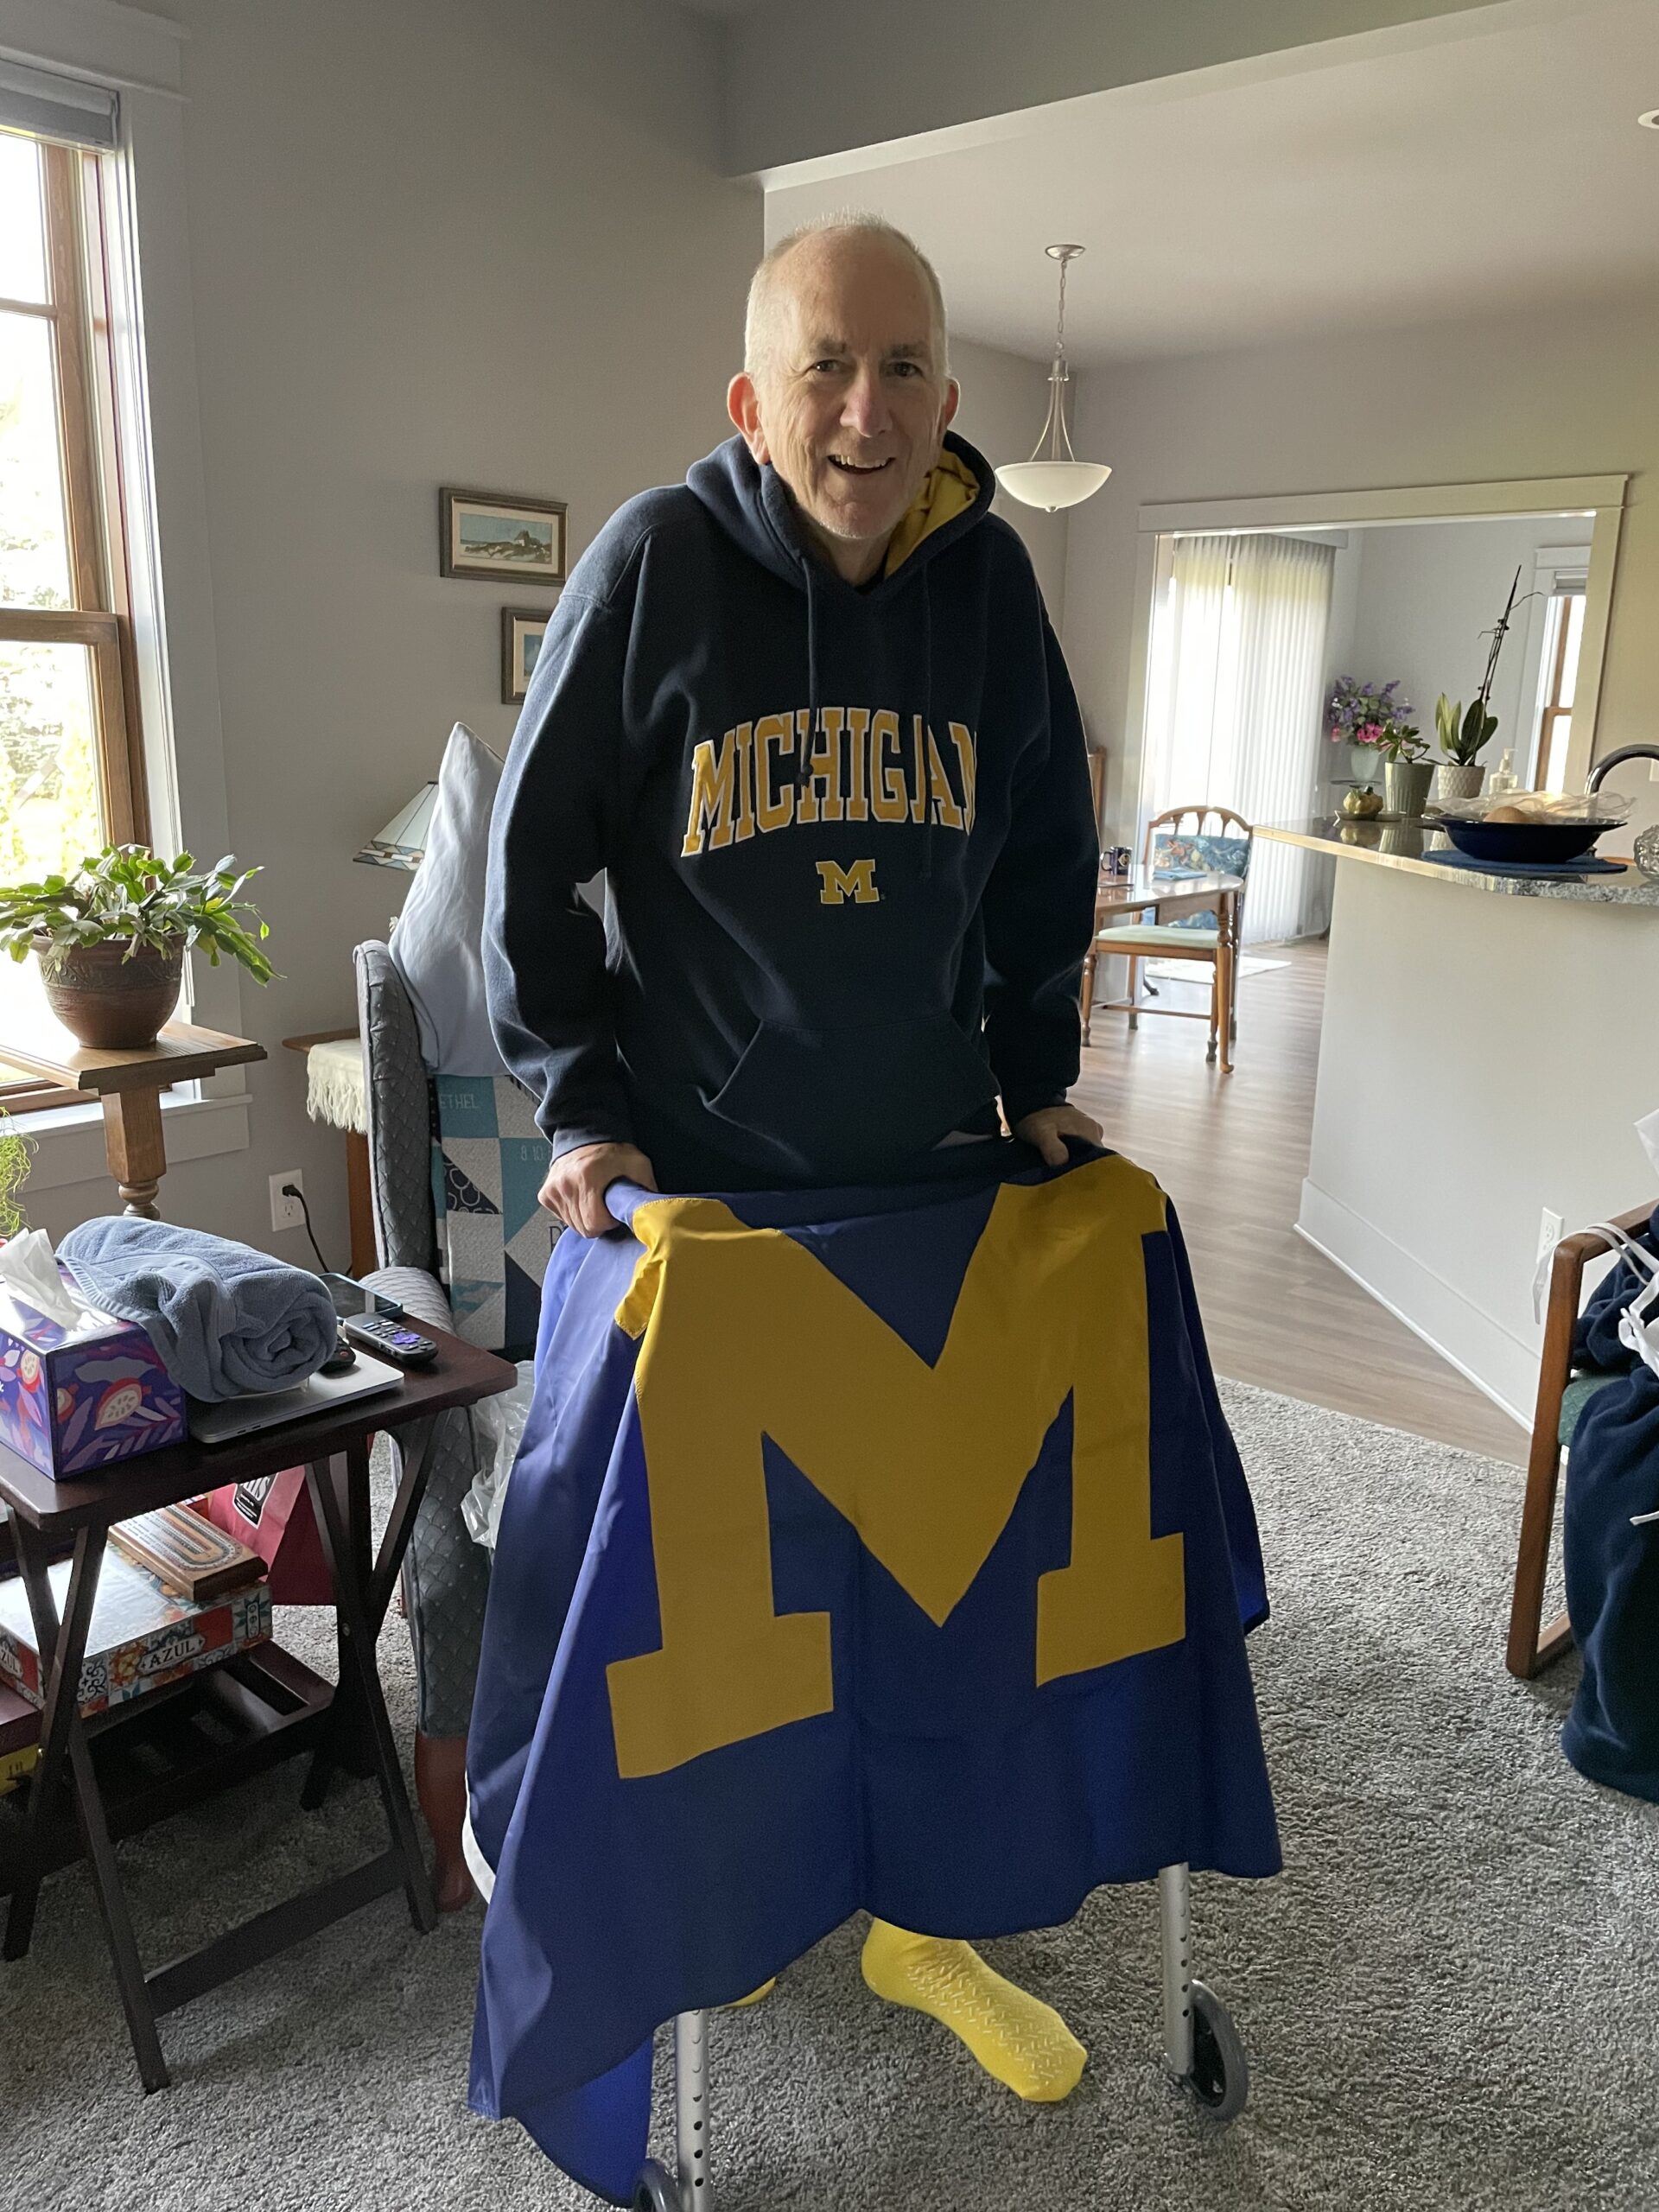 Recuperating at home in Bay City, Michigan, four days after his hip-replacement surgery, Keith Birchler, ’75, JD’78, cheered on the Wolverines as they defeated the Buckeyes this past football season.